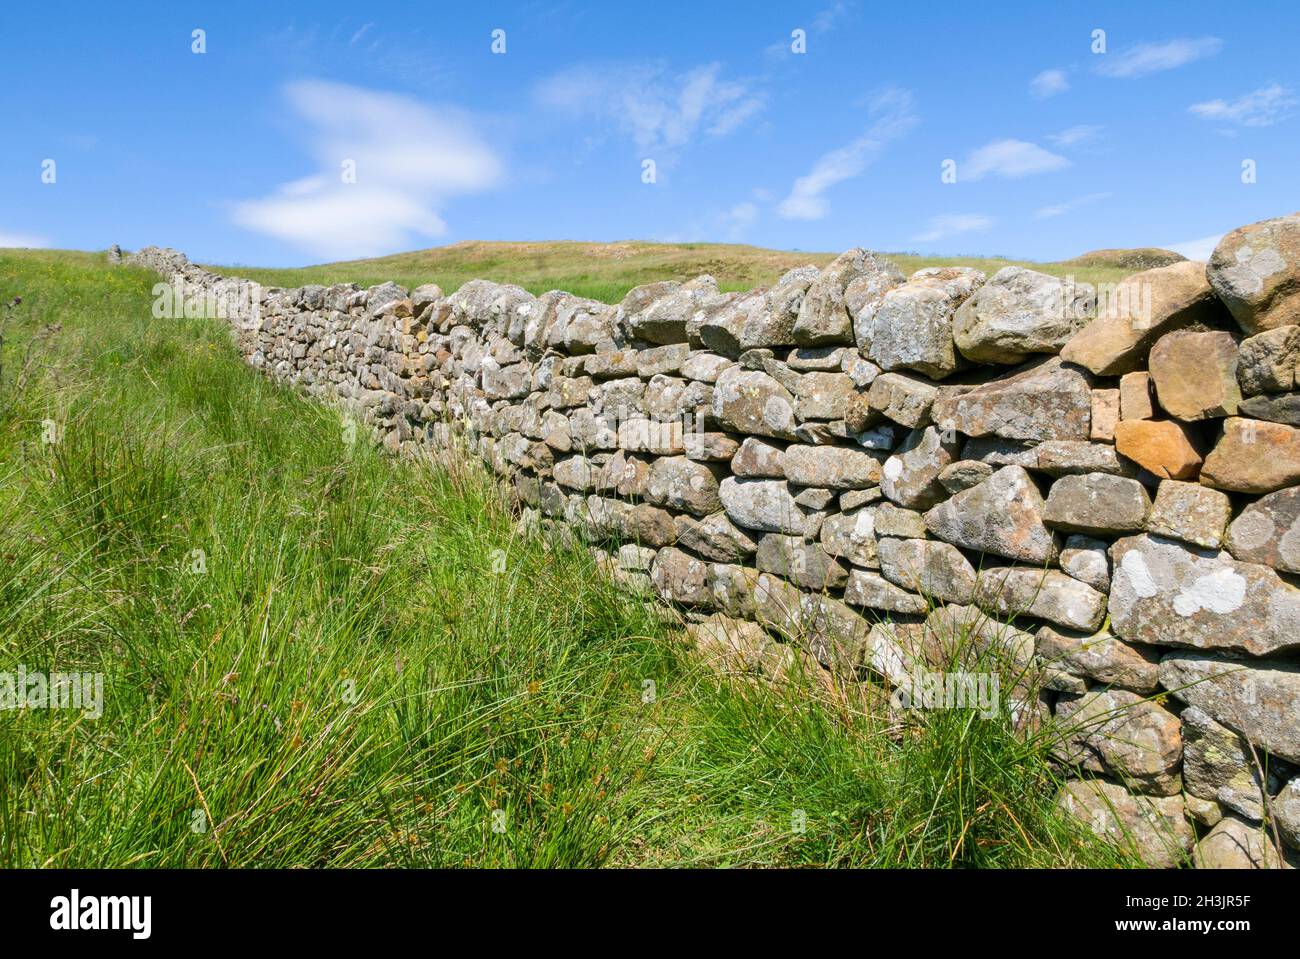 Dry stone walling or a Dry stone wall across a green field England GB UK Europe Stock Photo